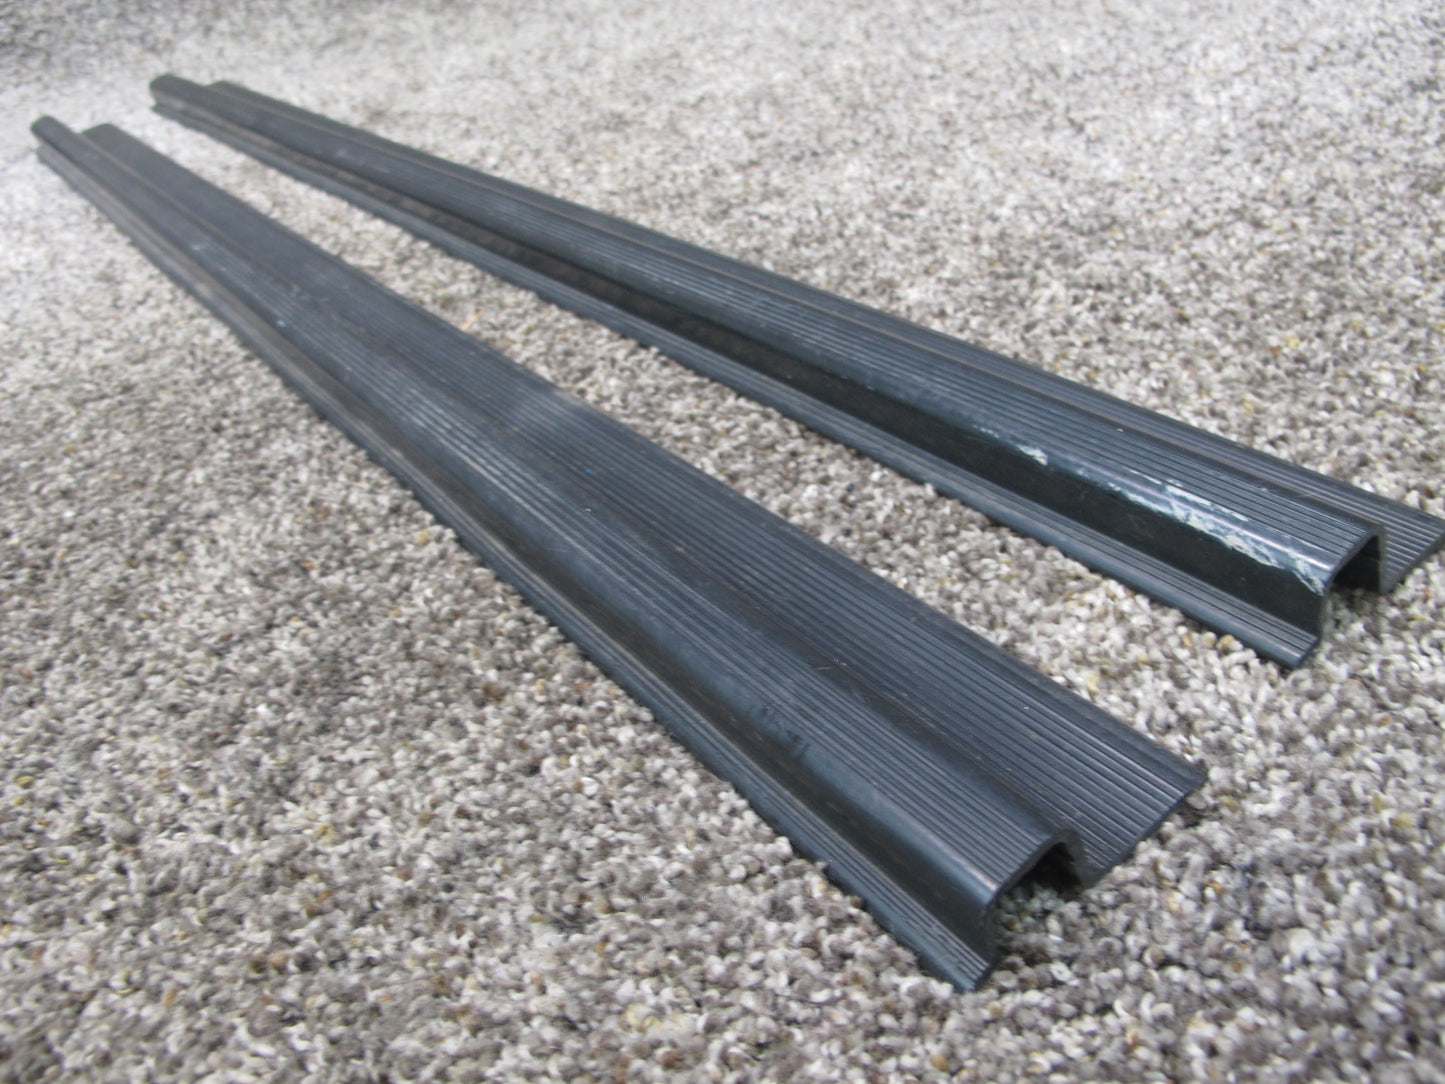 85-93 VW GOLF MK1 CABRIOLET SET OF 2 LEFT RIGHT DOOR SCUFF SILL PLATE TRIM OEM